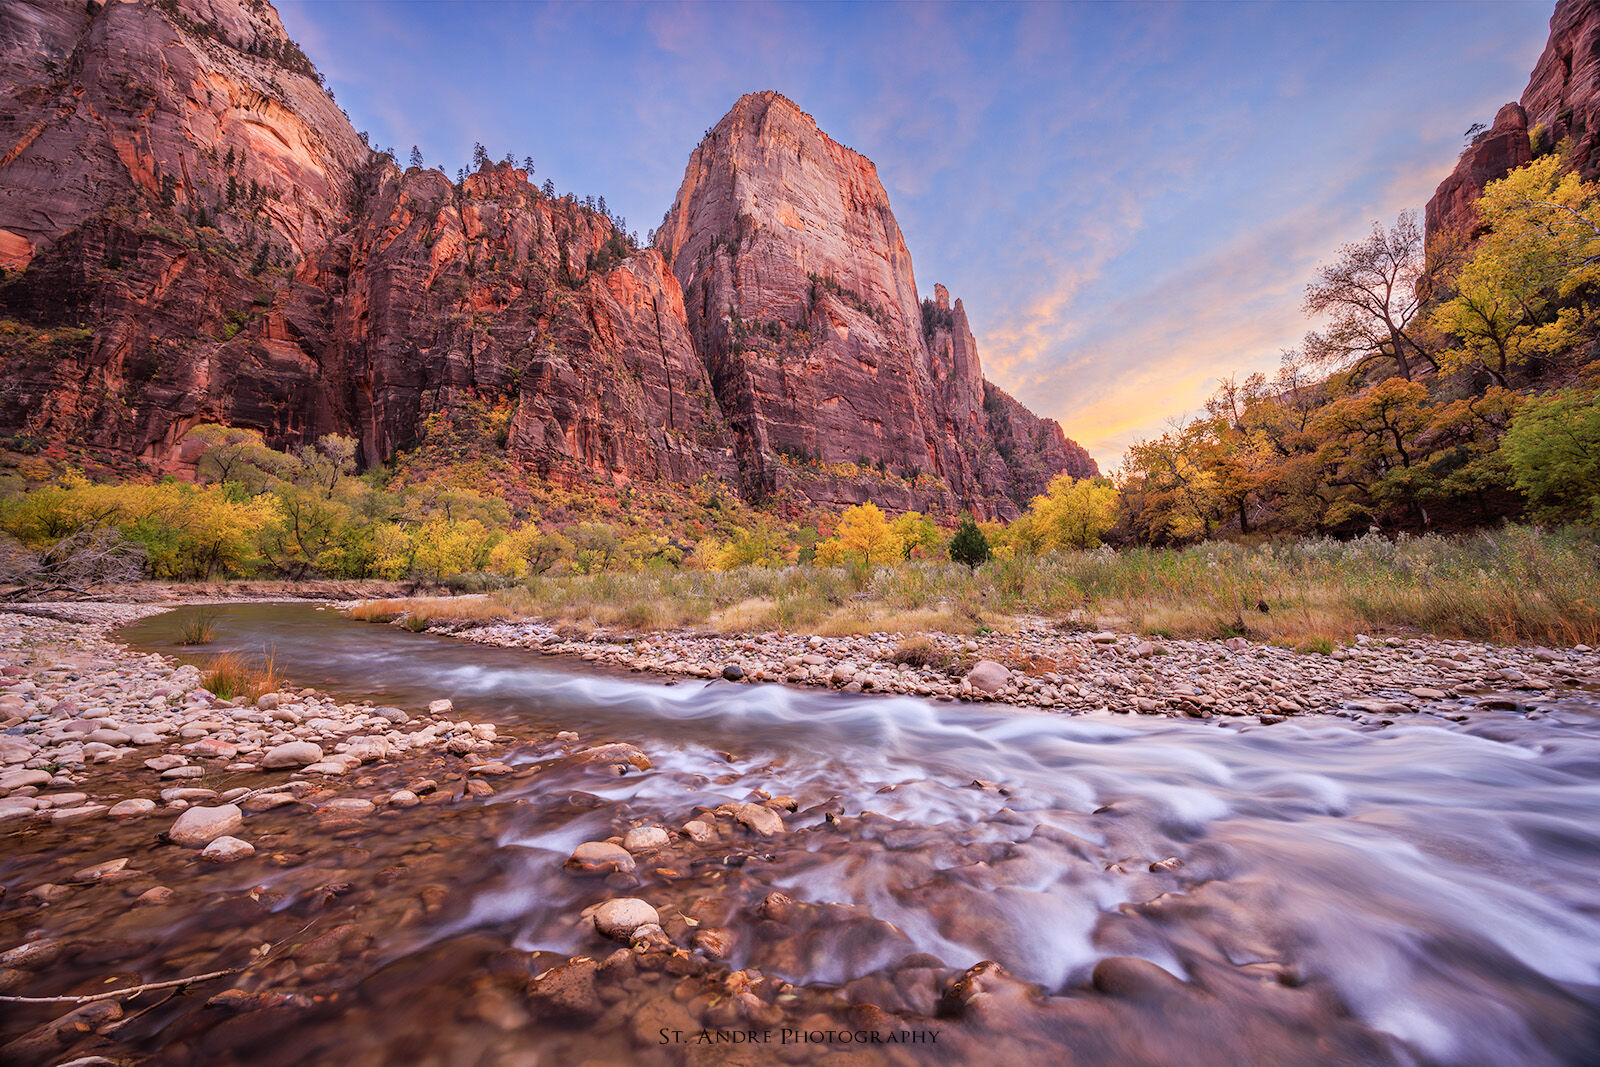 The Great White Throne in Zion National Park with fall colors and the virgin river flowing through the seen. 